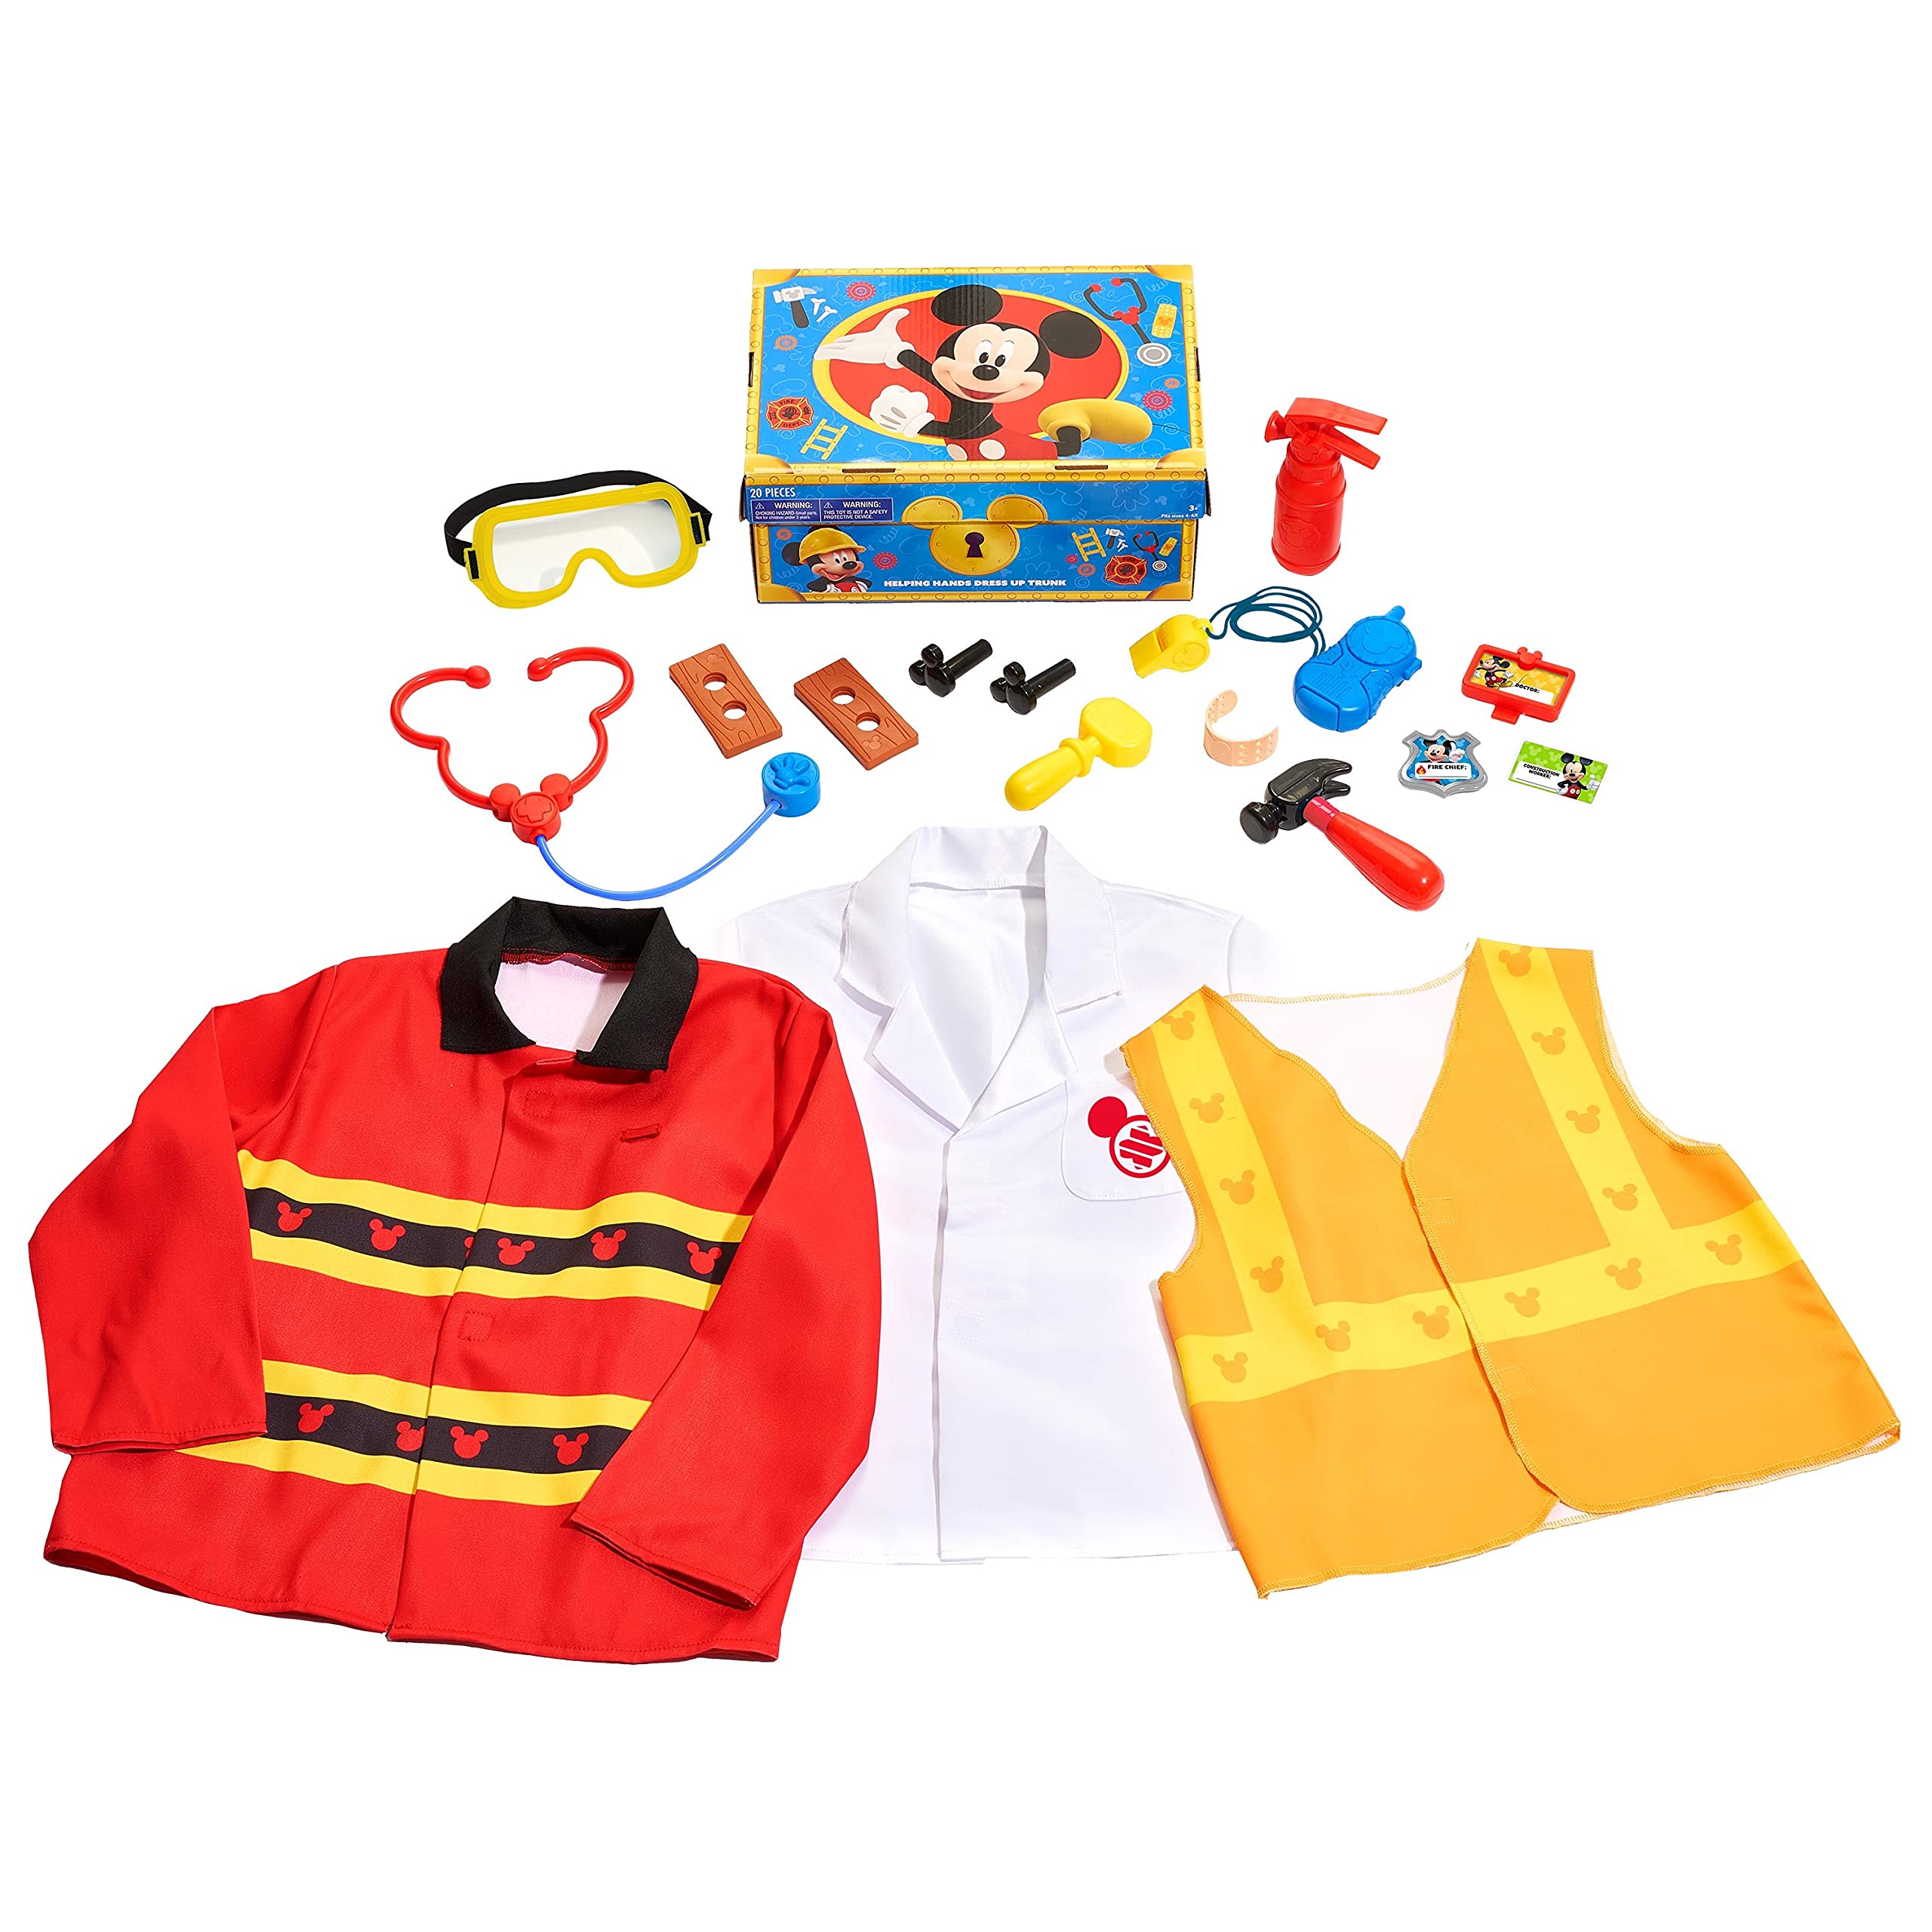 Disney Junior Mickey Mouse Helping Hands Dress Up Trunk, 19 Piece Pretend Play Set with Storage, Size 4-6X, Amazon Exclusive, by Just Play